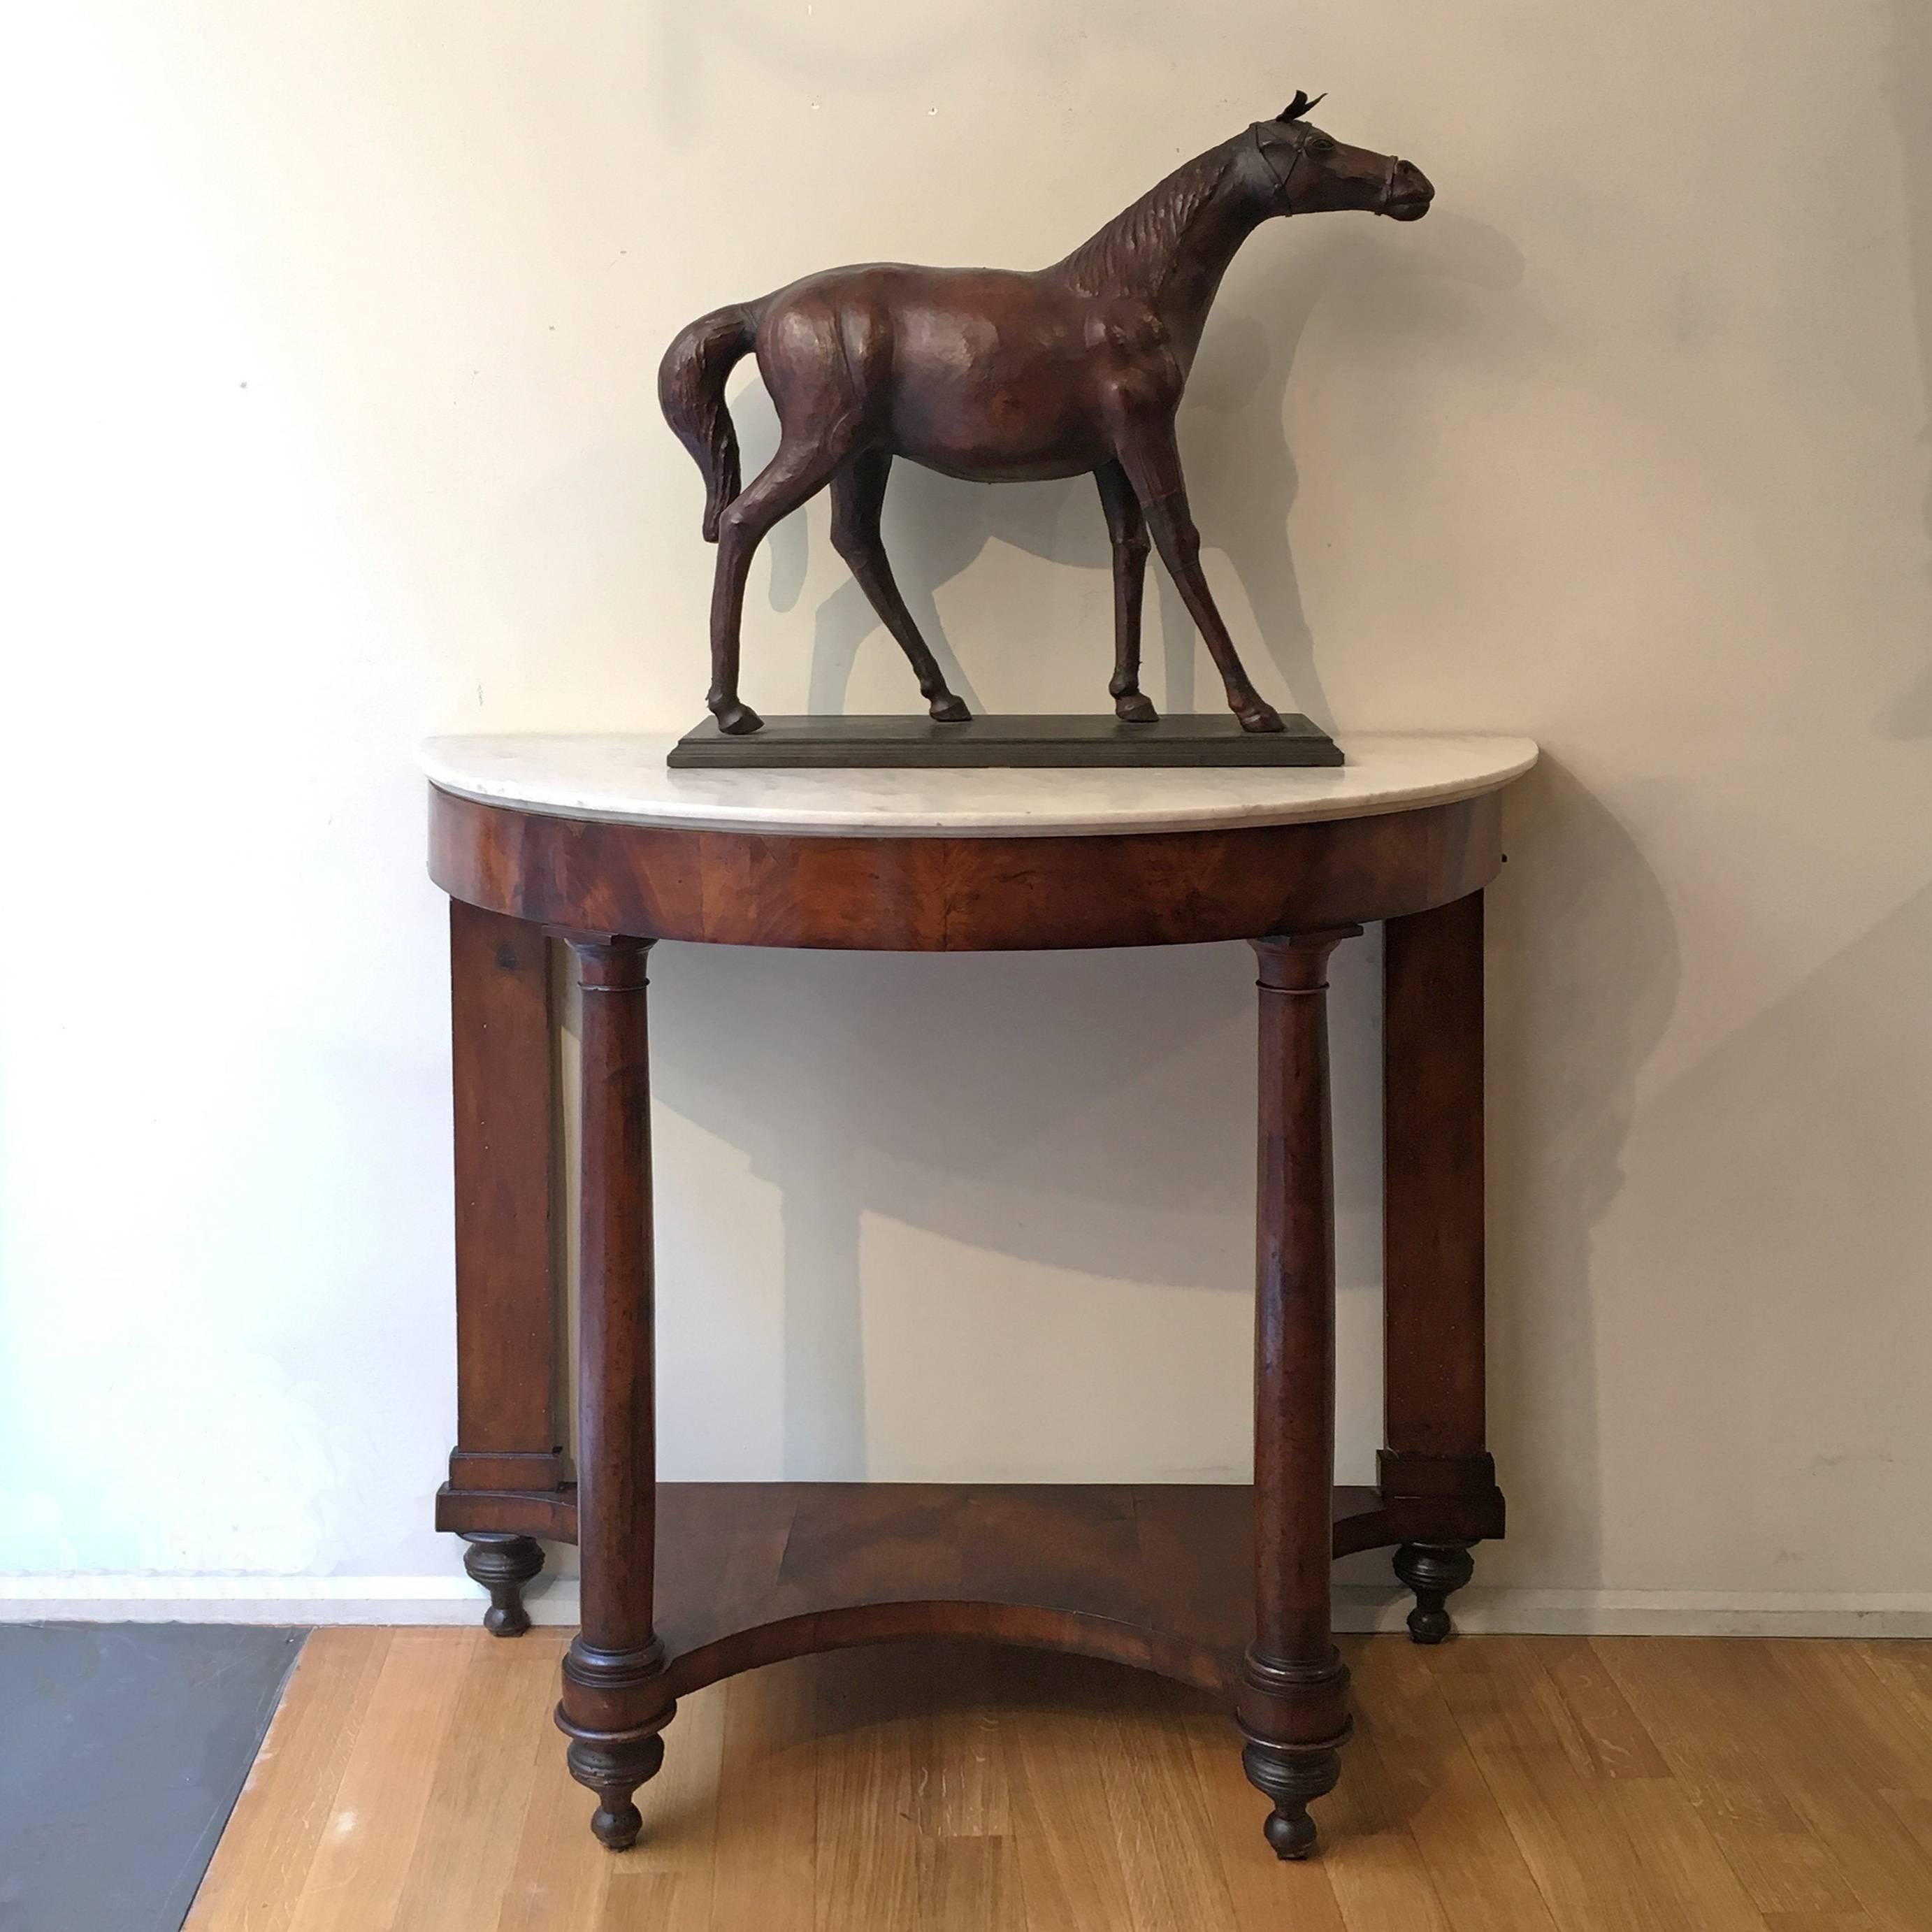 Late 19th Century French Handmade Leather Full Body Horse Sculpture or Model 7